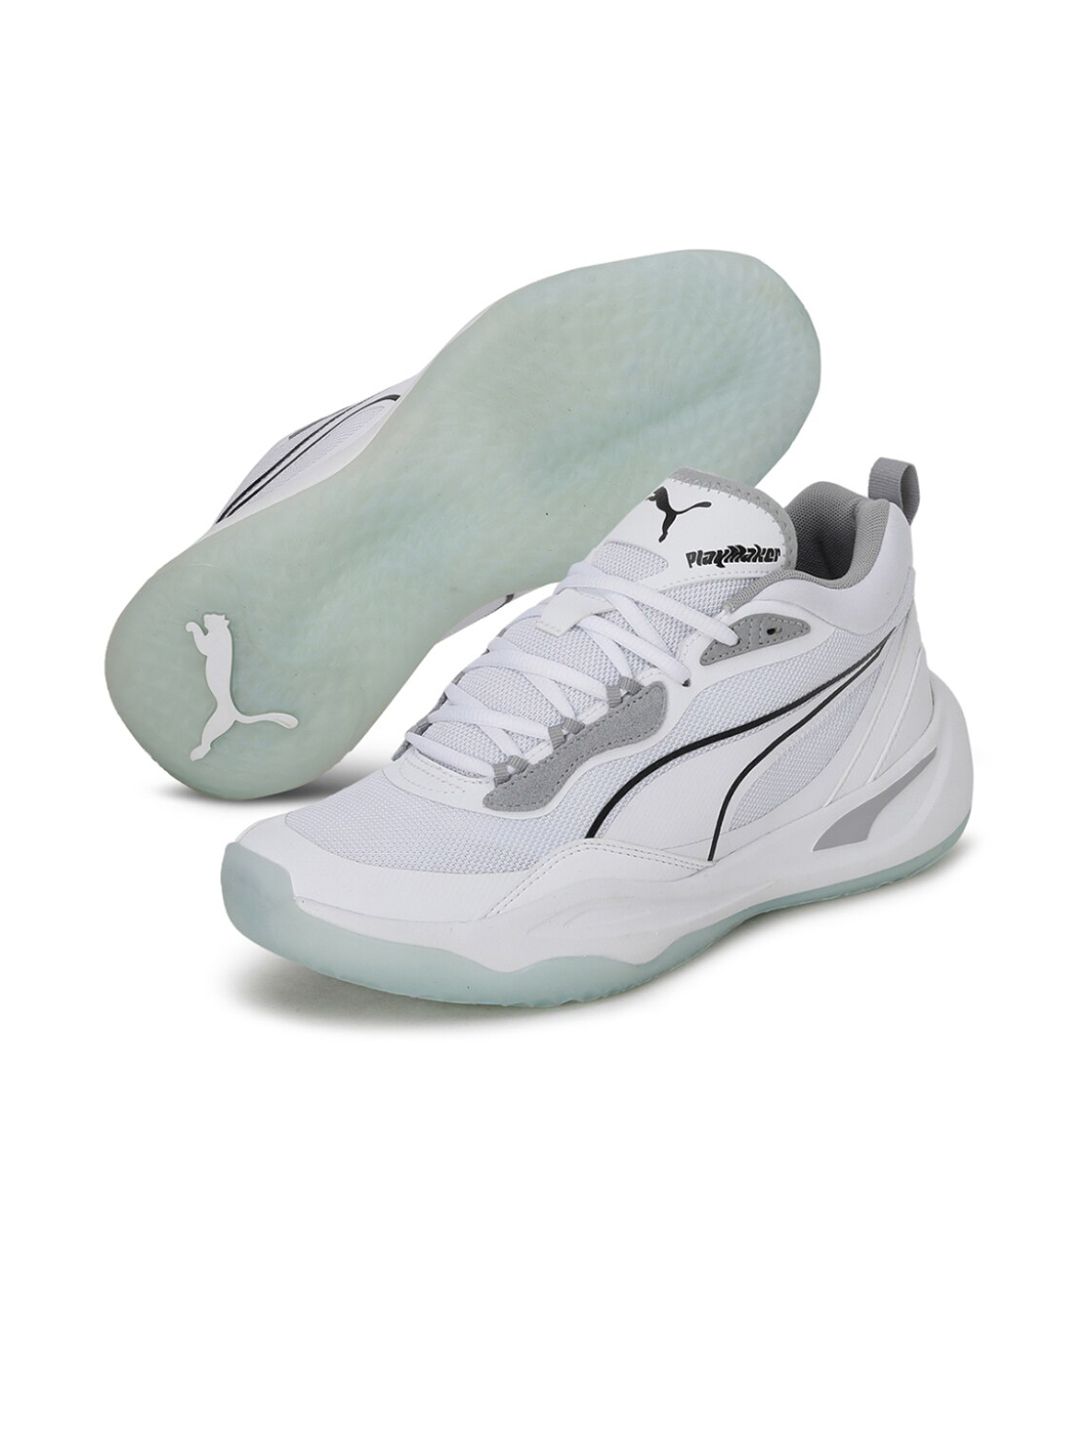 Puma Unisex White Playmaker Sneakers Price in India